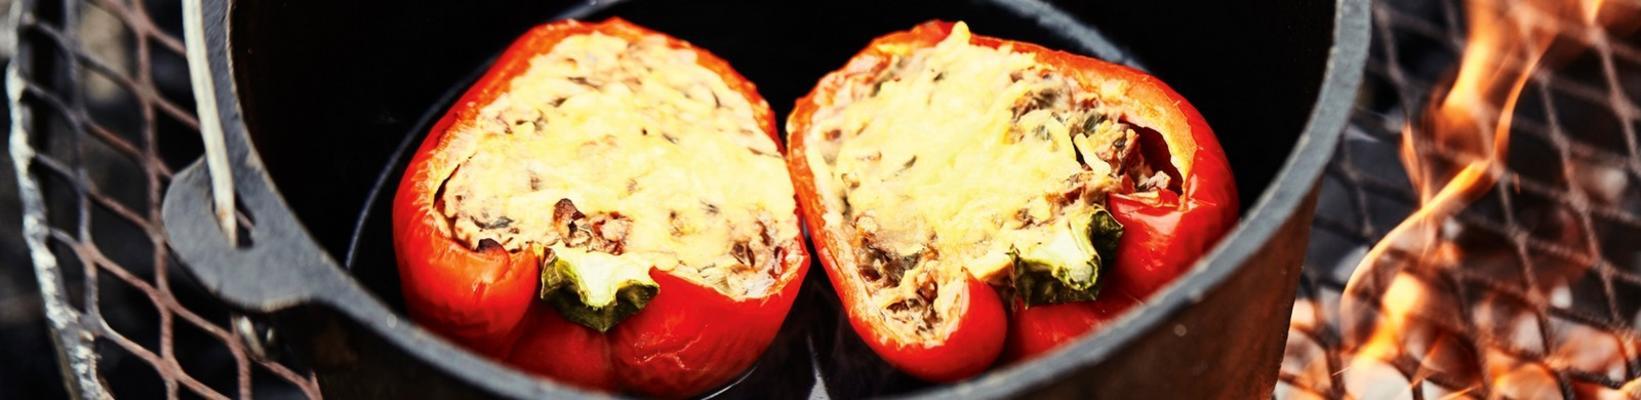 stuffed bell peppers from dick altena